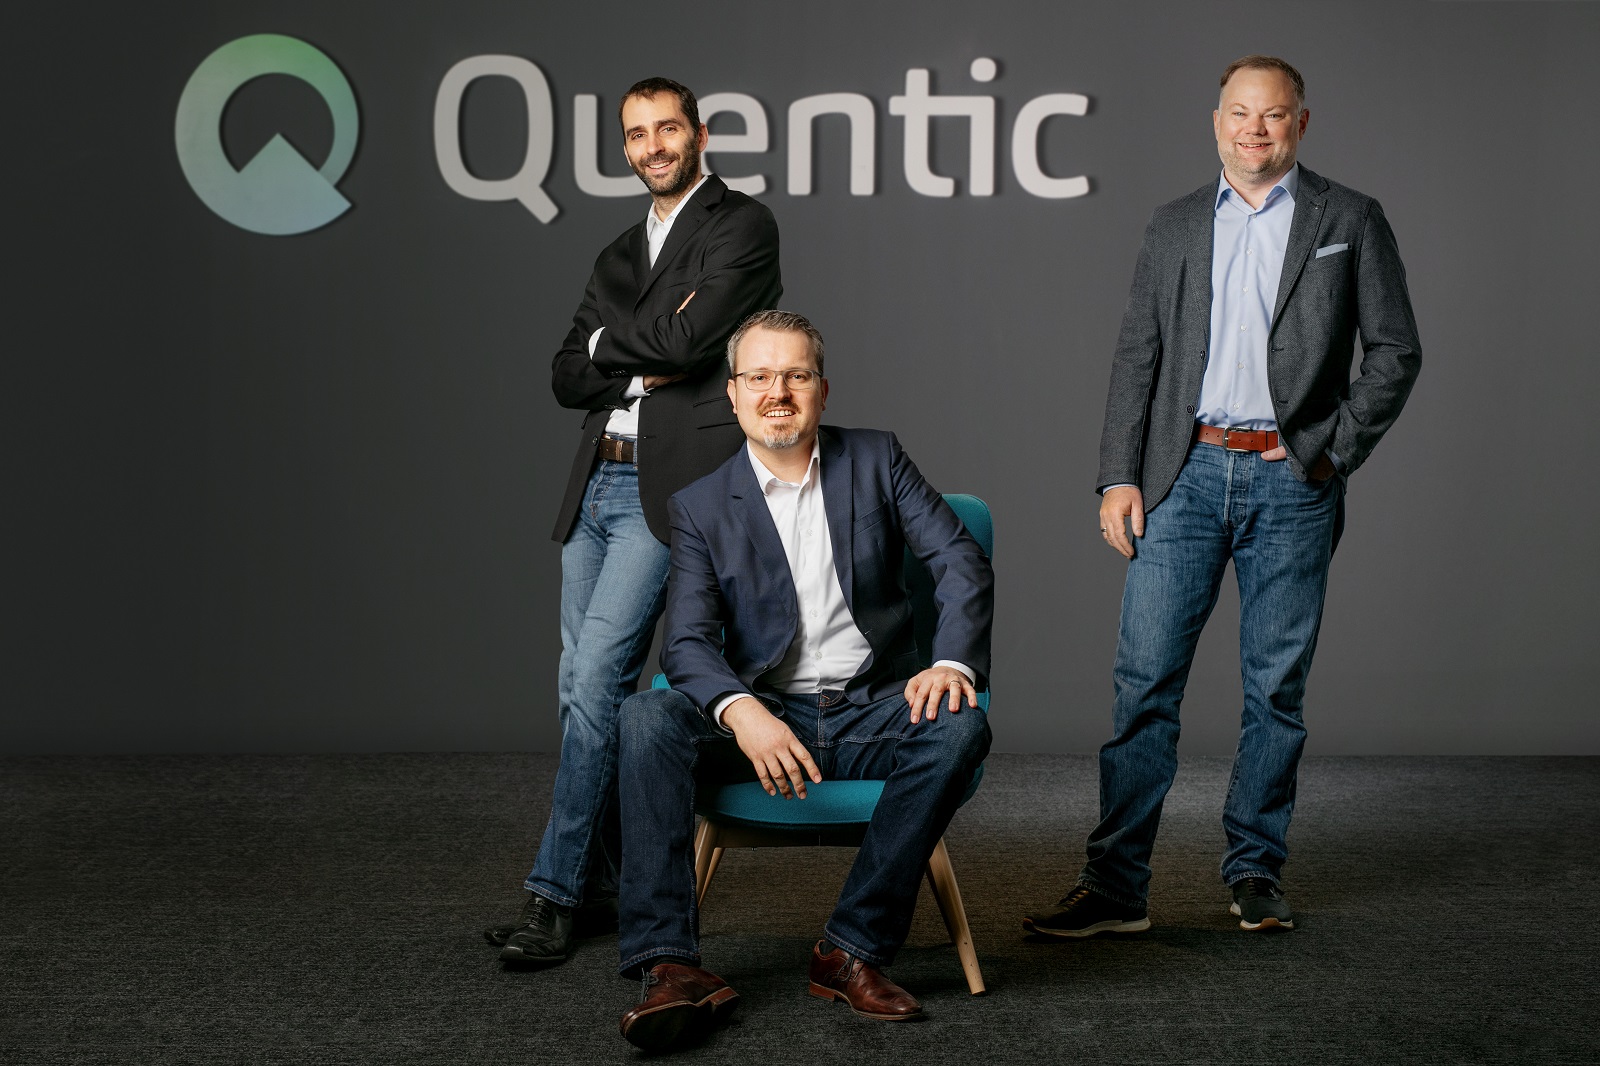 AMCS Completes Acquisition of EHSQ and ESG Management SaaS Provider Quentic